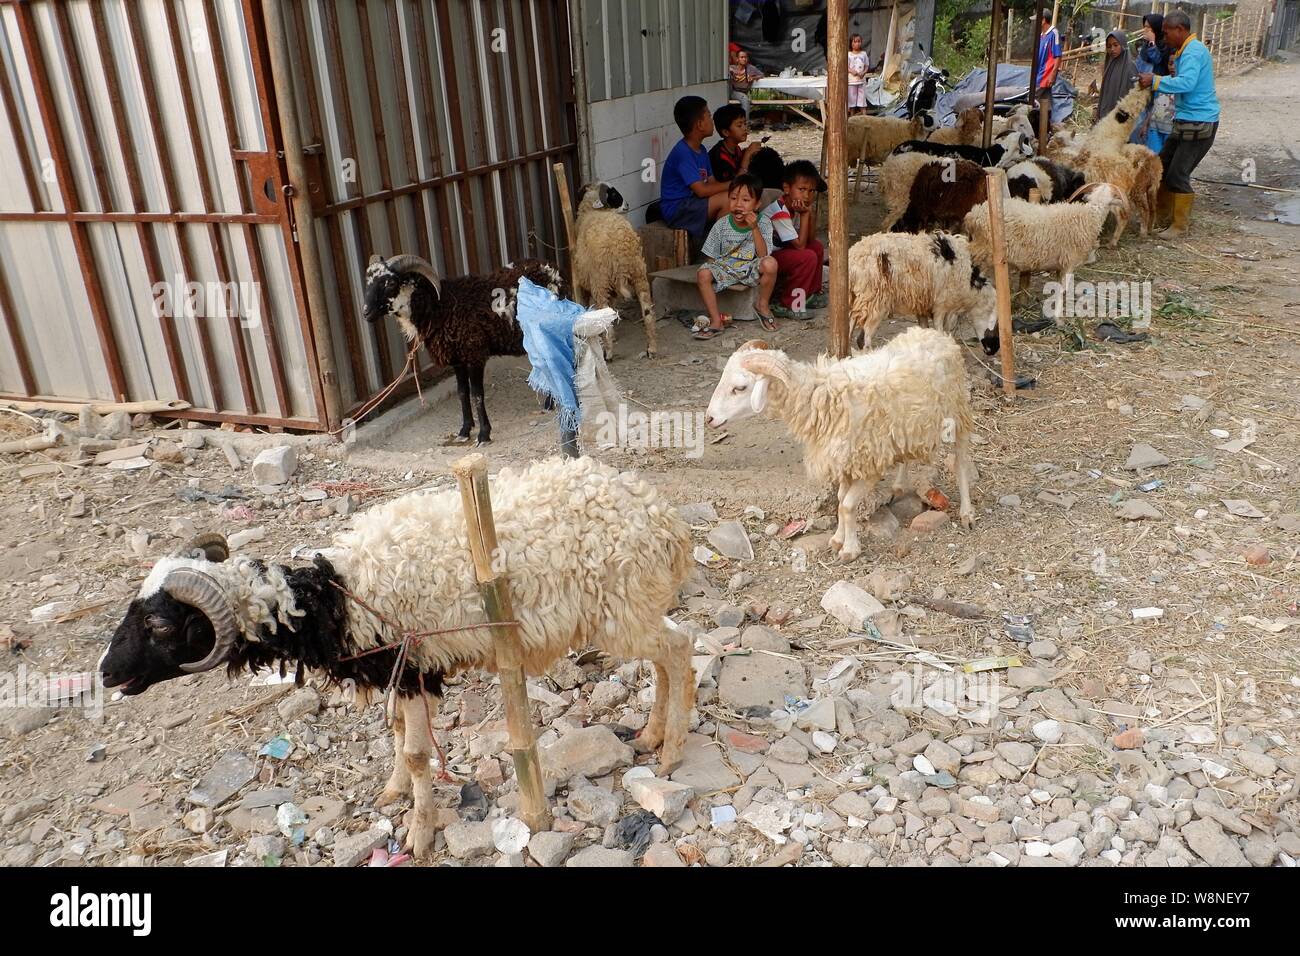 A group of sheep and people in a stock husbandry. Stock Photo